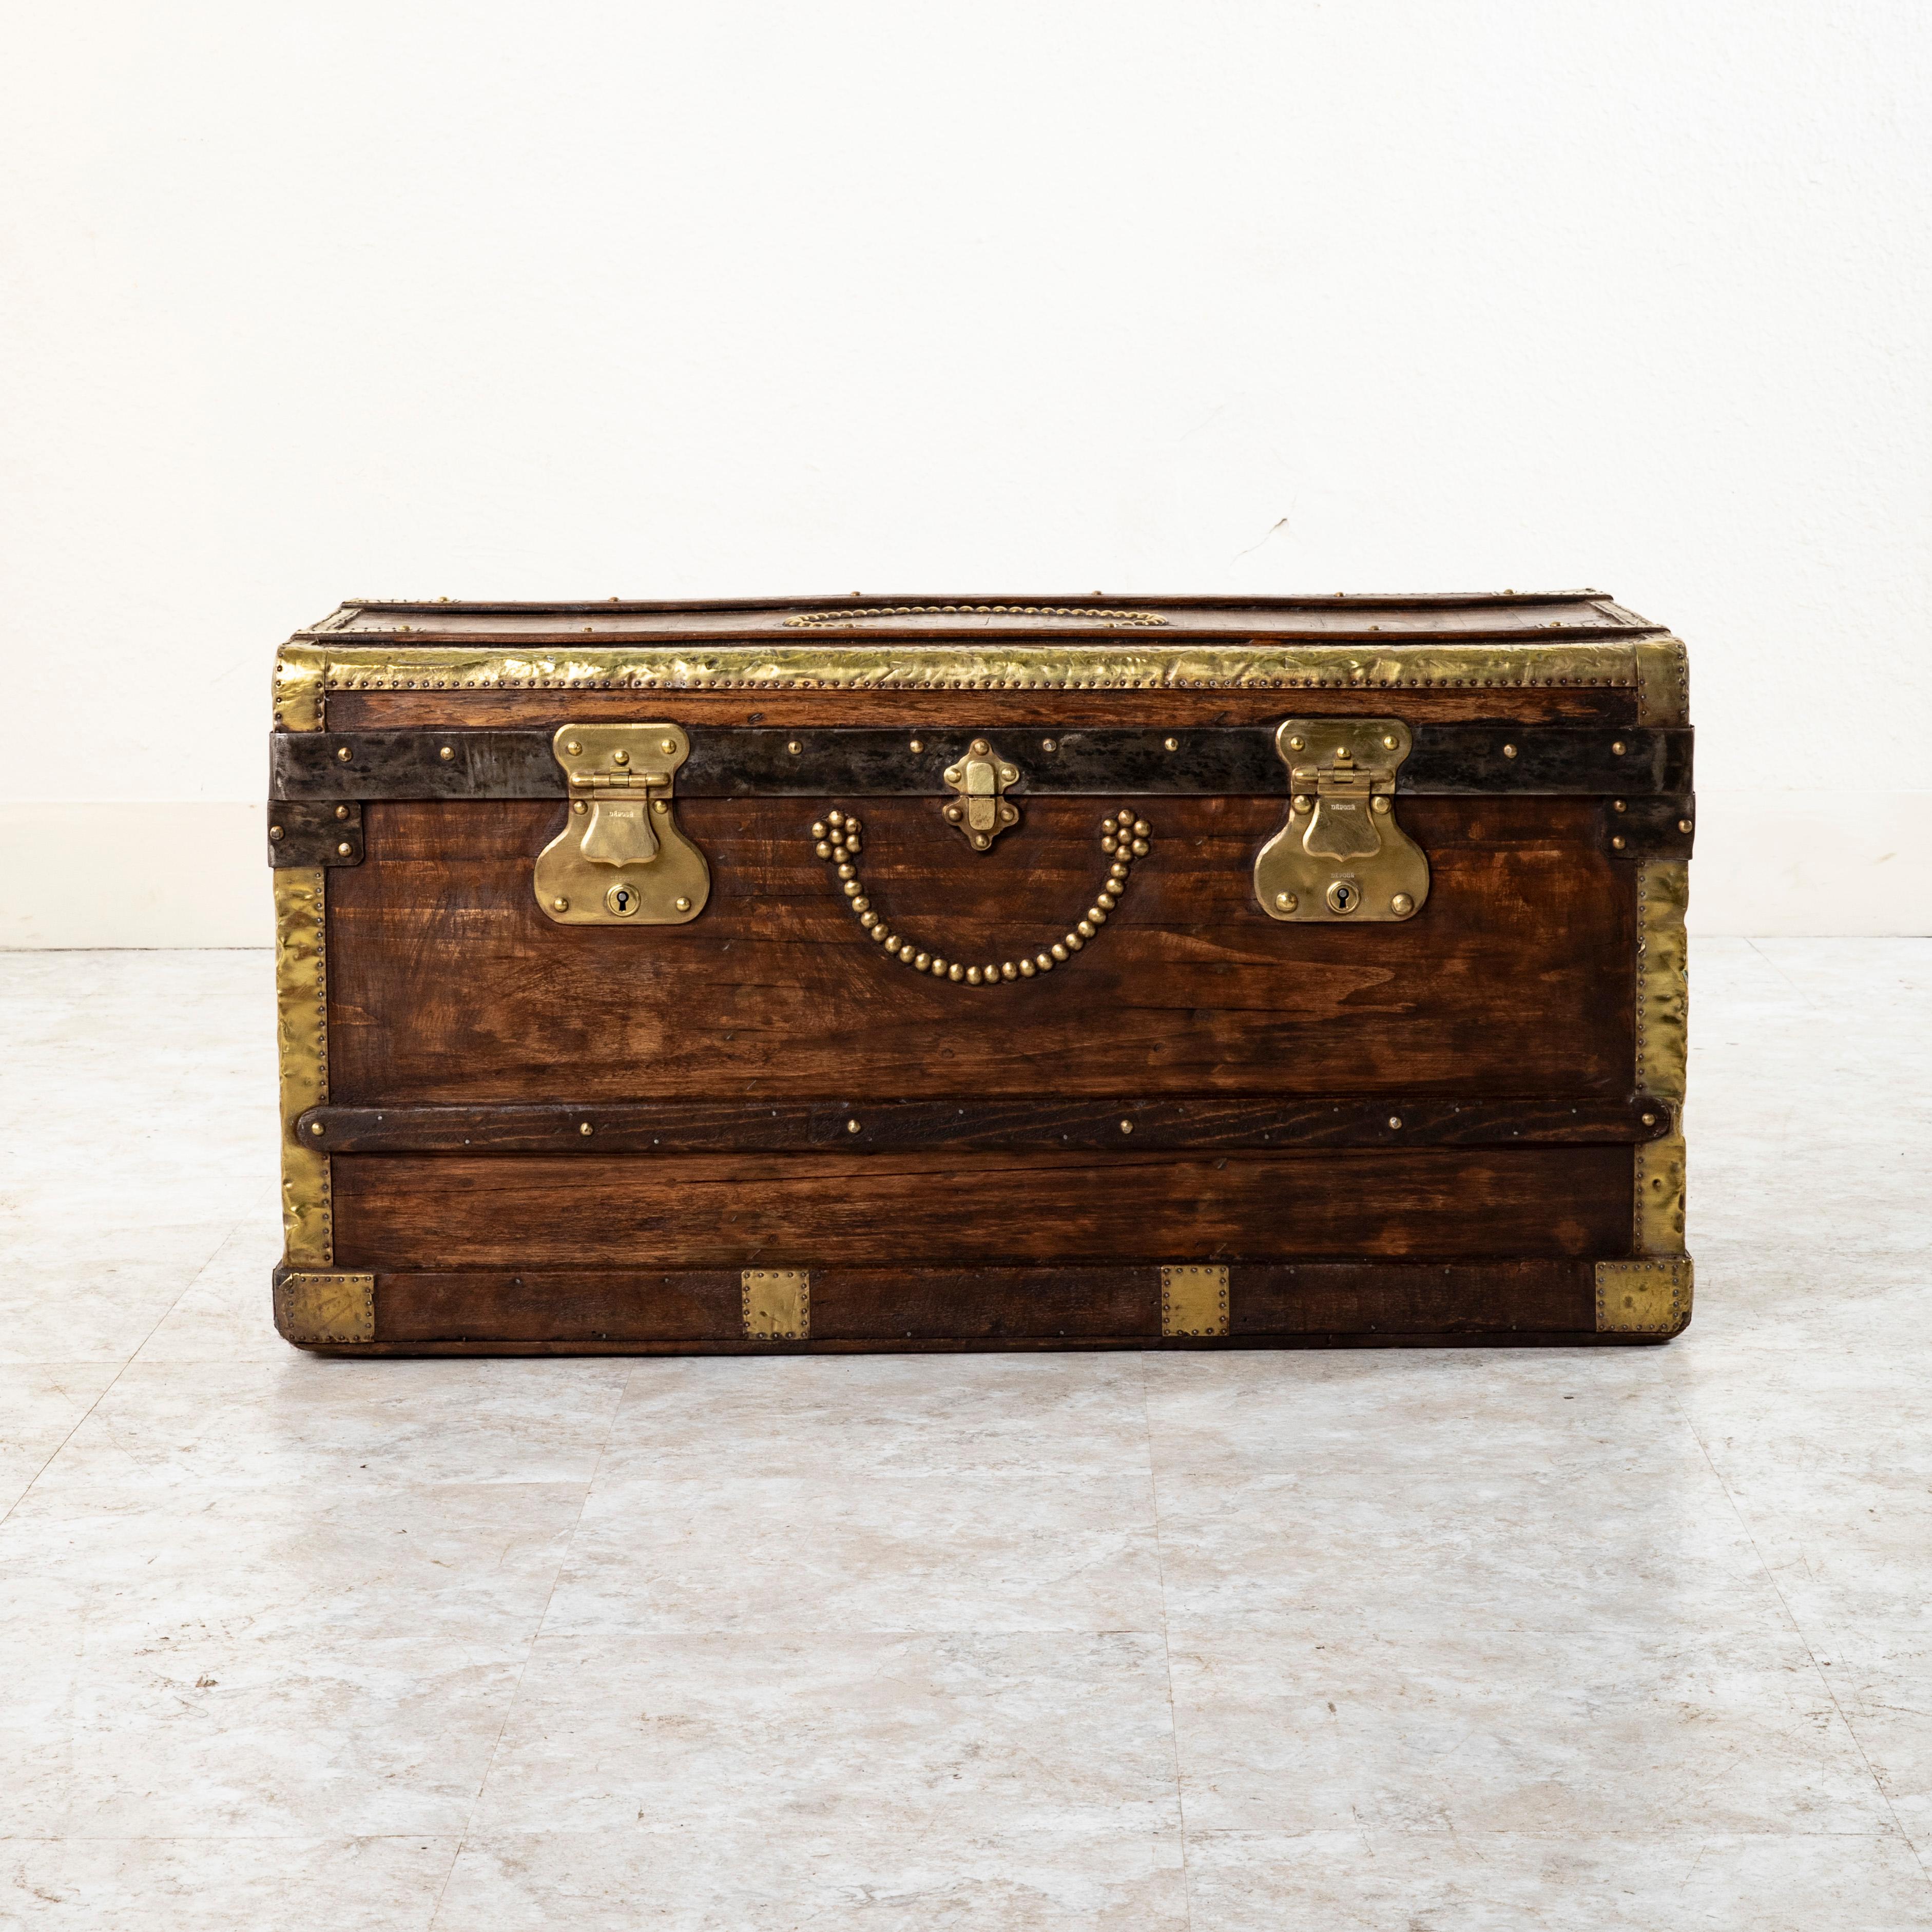 French Wooden Steam Trunk with Runners, Brass, Iron, Leather Details, circa 1880 In Good Condition For Sale In Fayetteville, AR